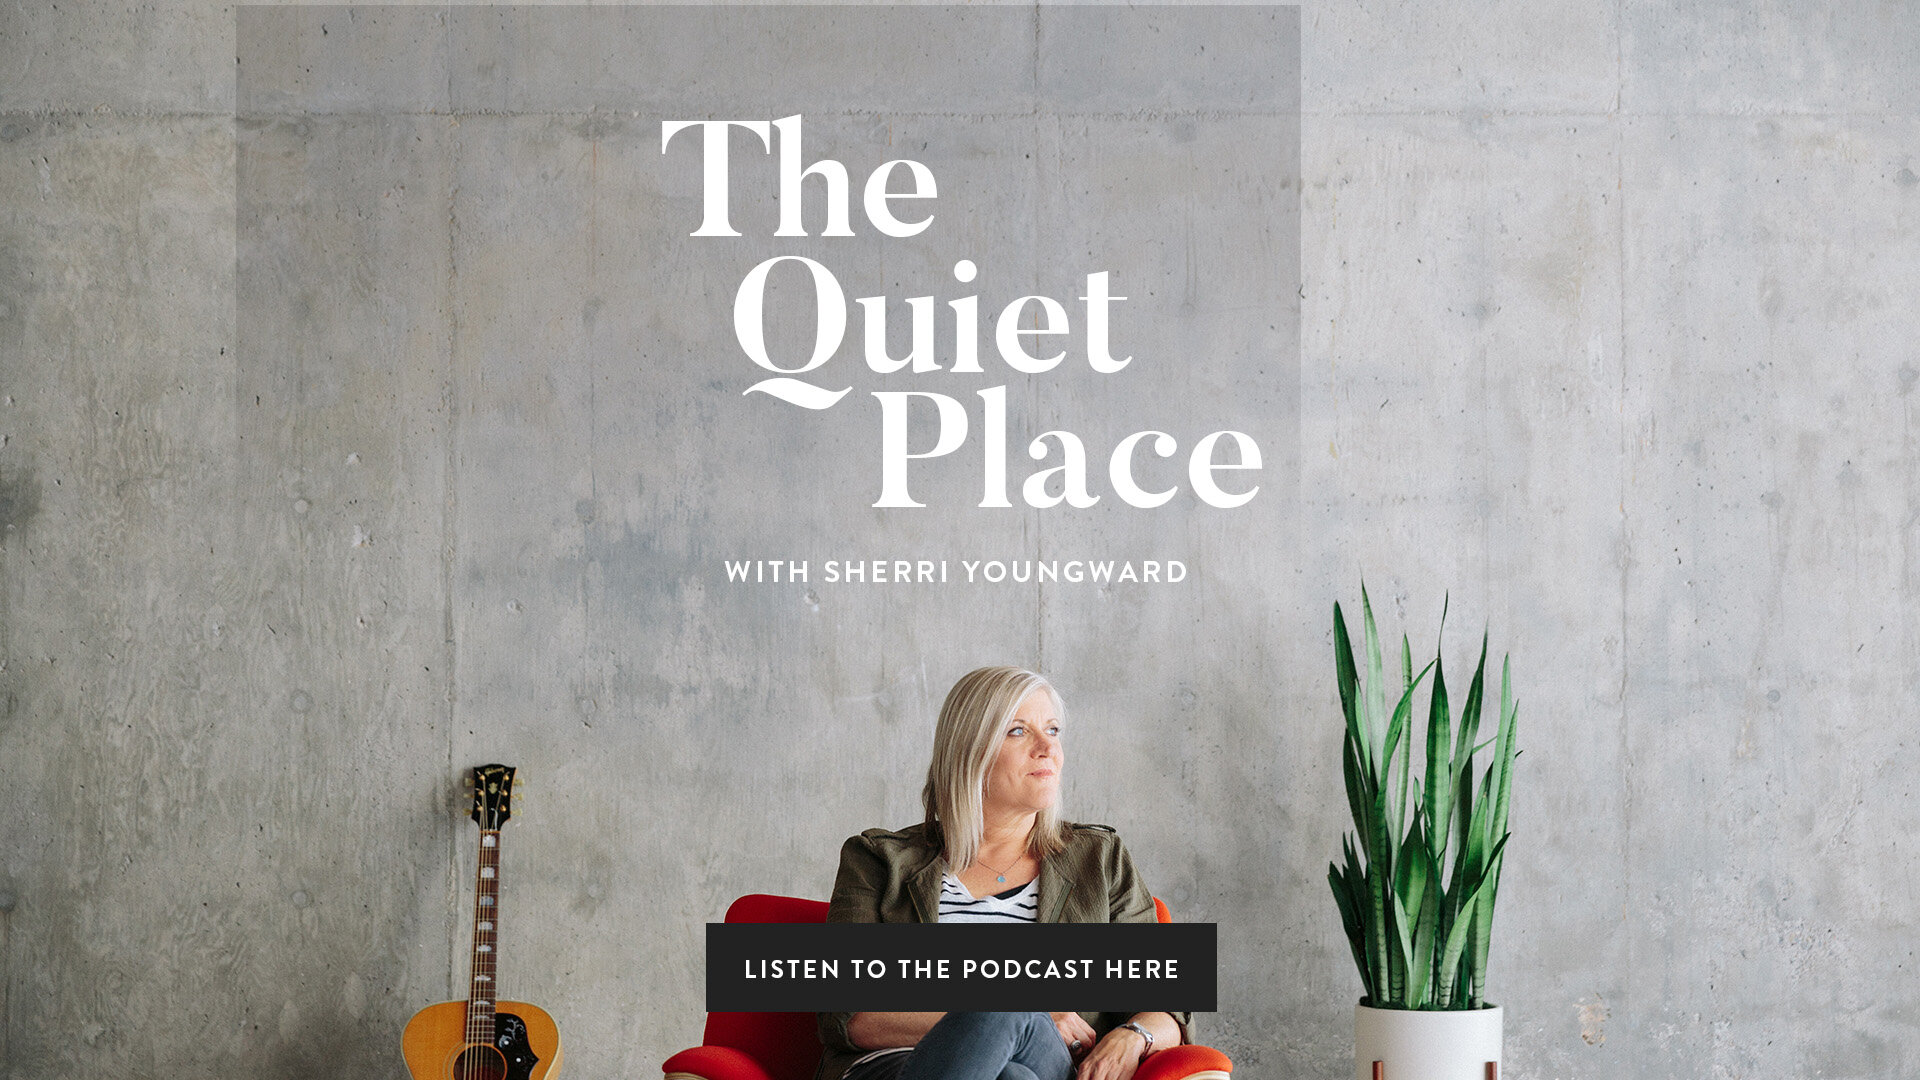 The Quiet Place with Sherri Youngward